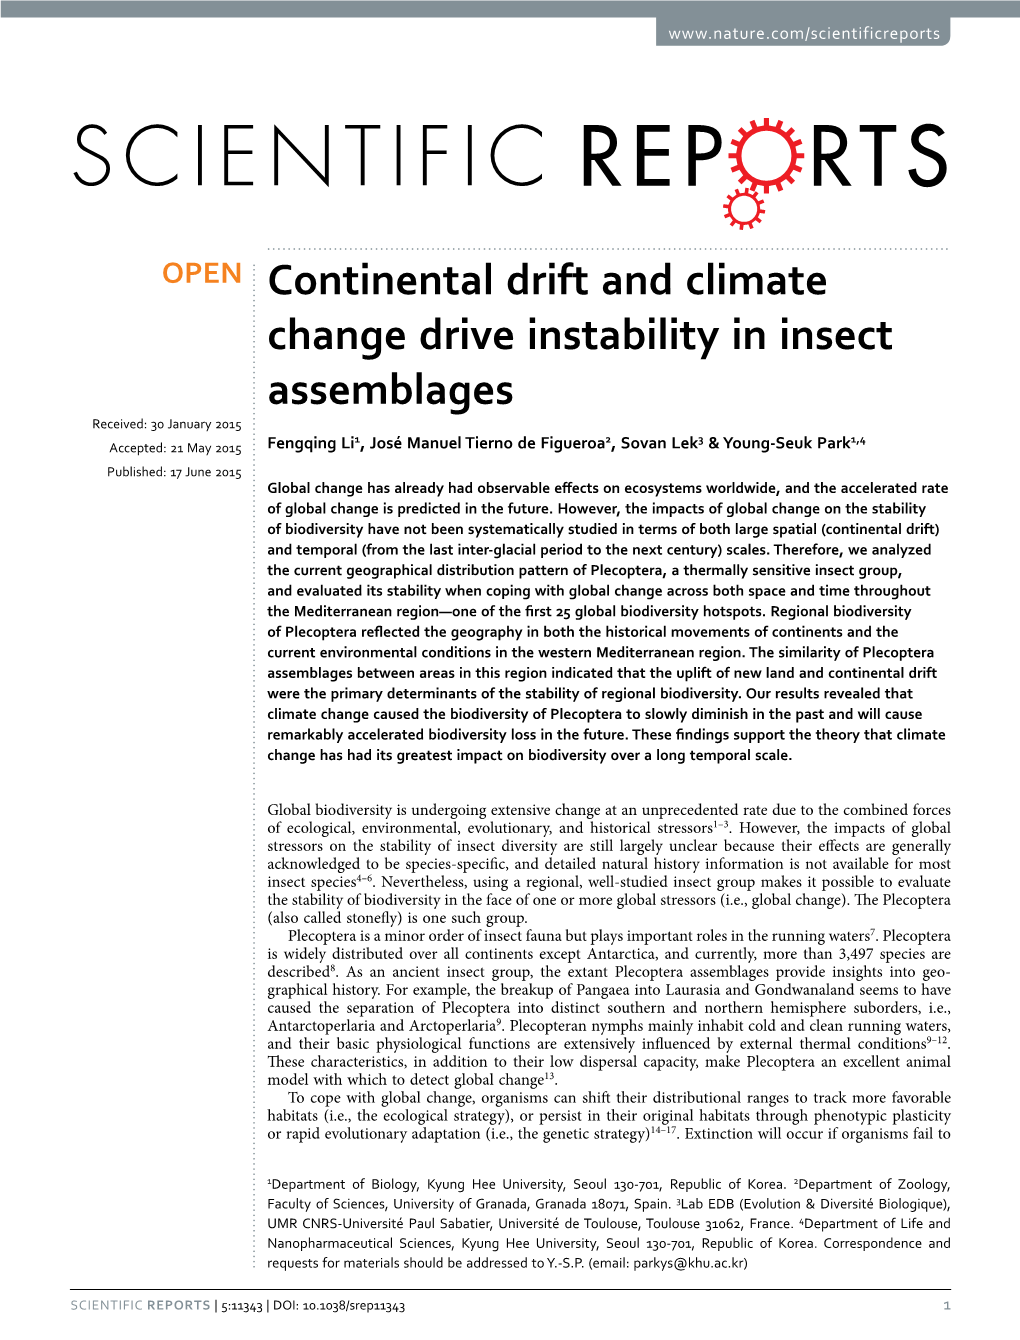 Continental Drift and Climate Change Drive Instability in Insect Assemblages